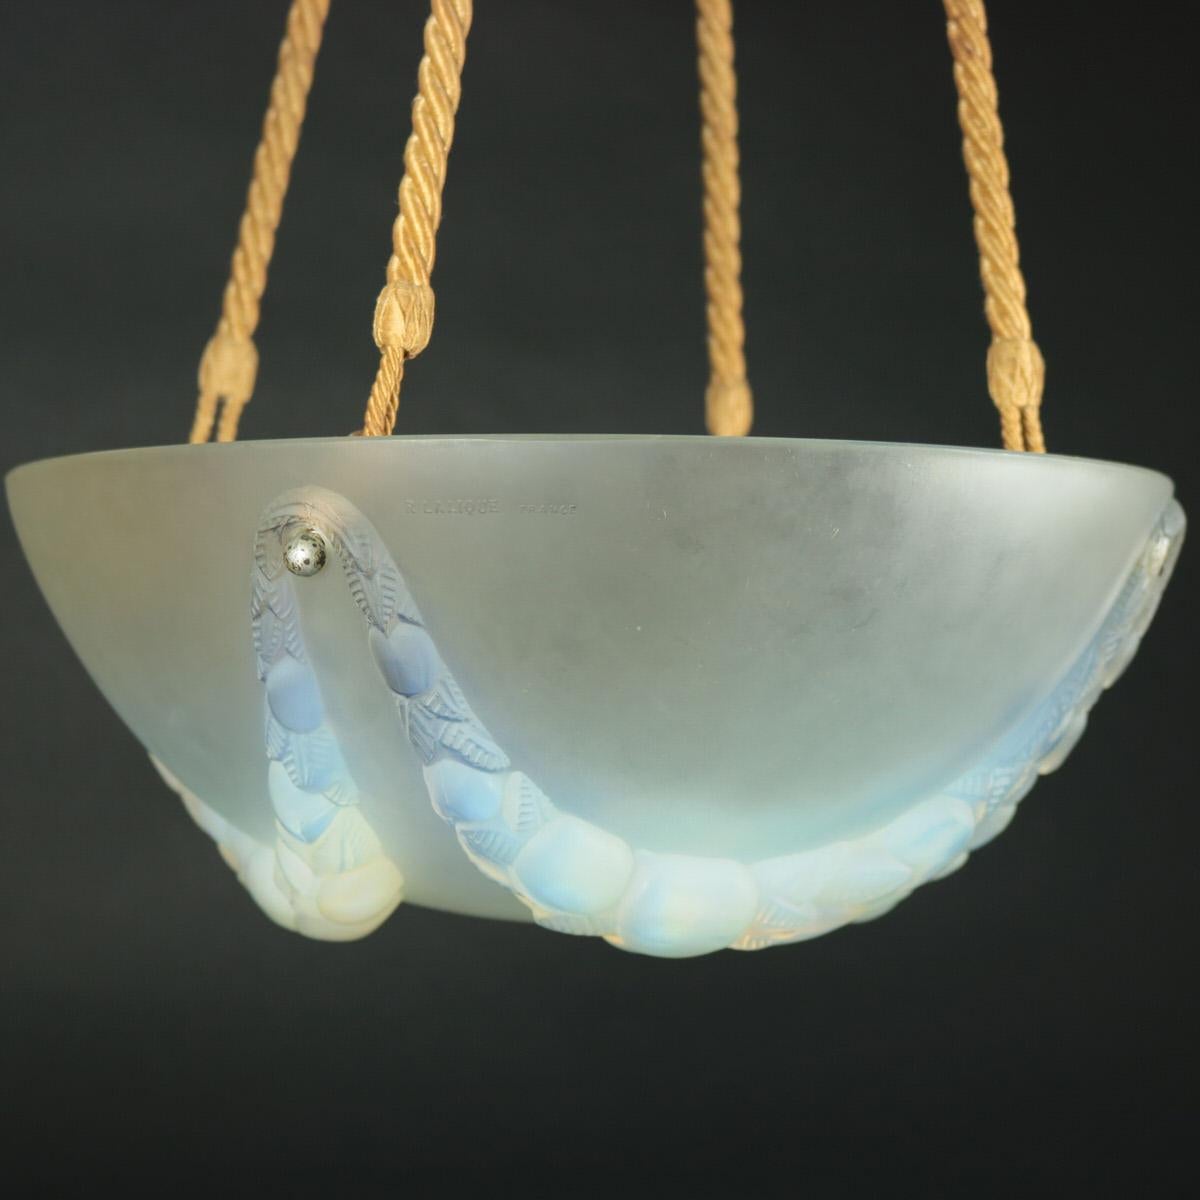 René Lalique opalescent and frosted glass Villeneuve ceiling light shade. This pattern features hanging garlands of fruit and leaves, around the outside. Four hooks bolted around the sides (removable), which attach the rope for hanging the shade.